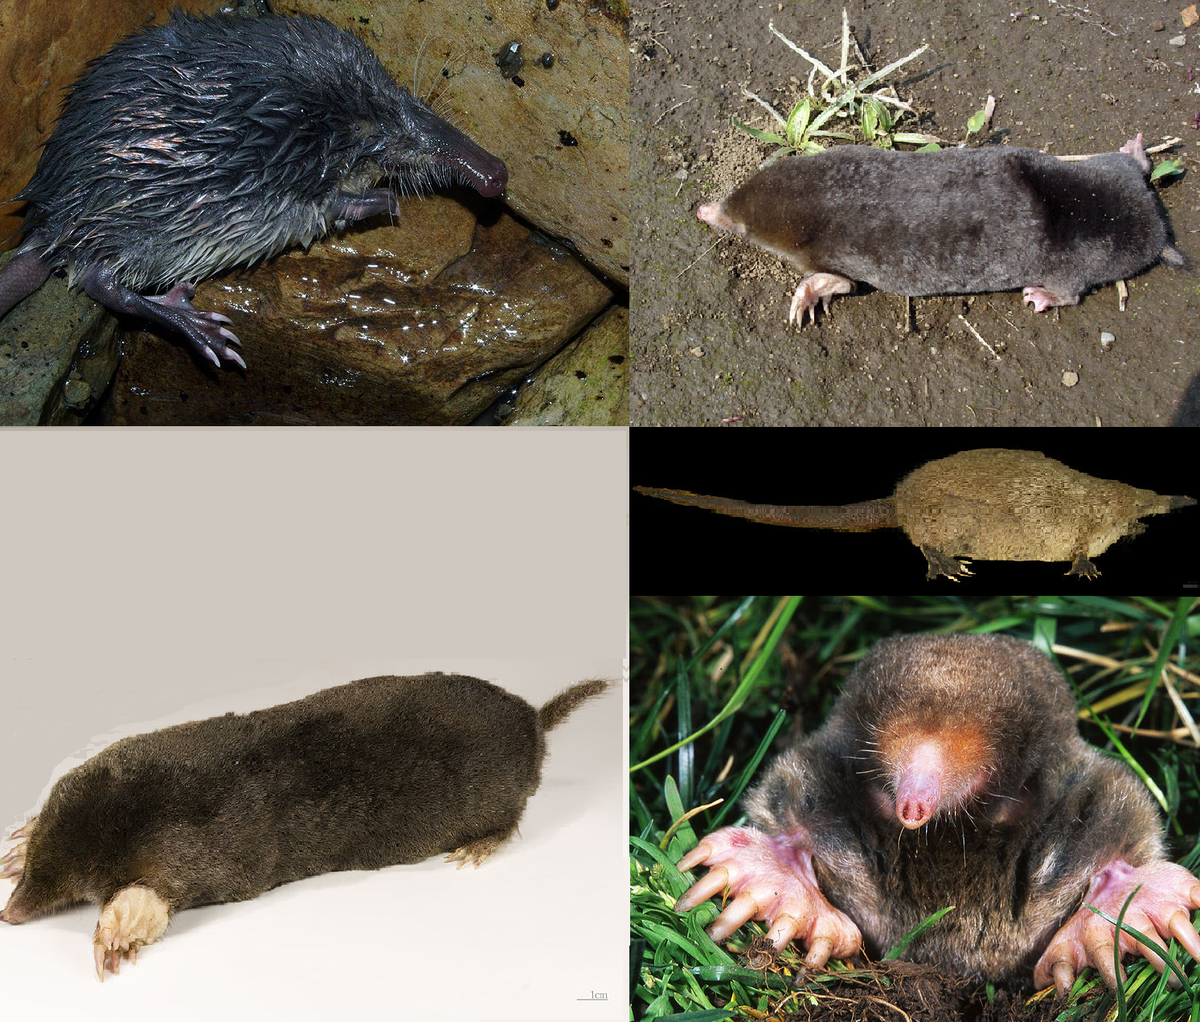 How many species of moles are there in the world?